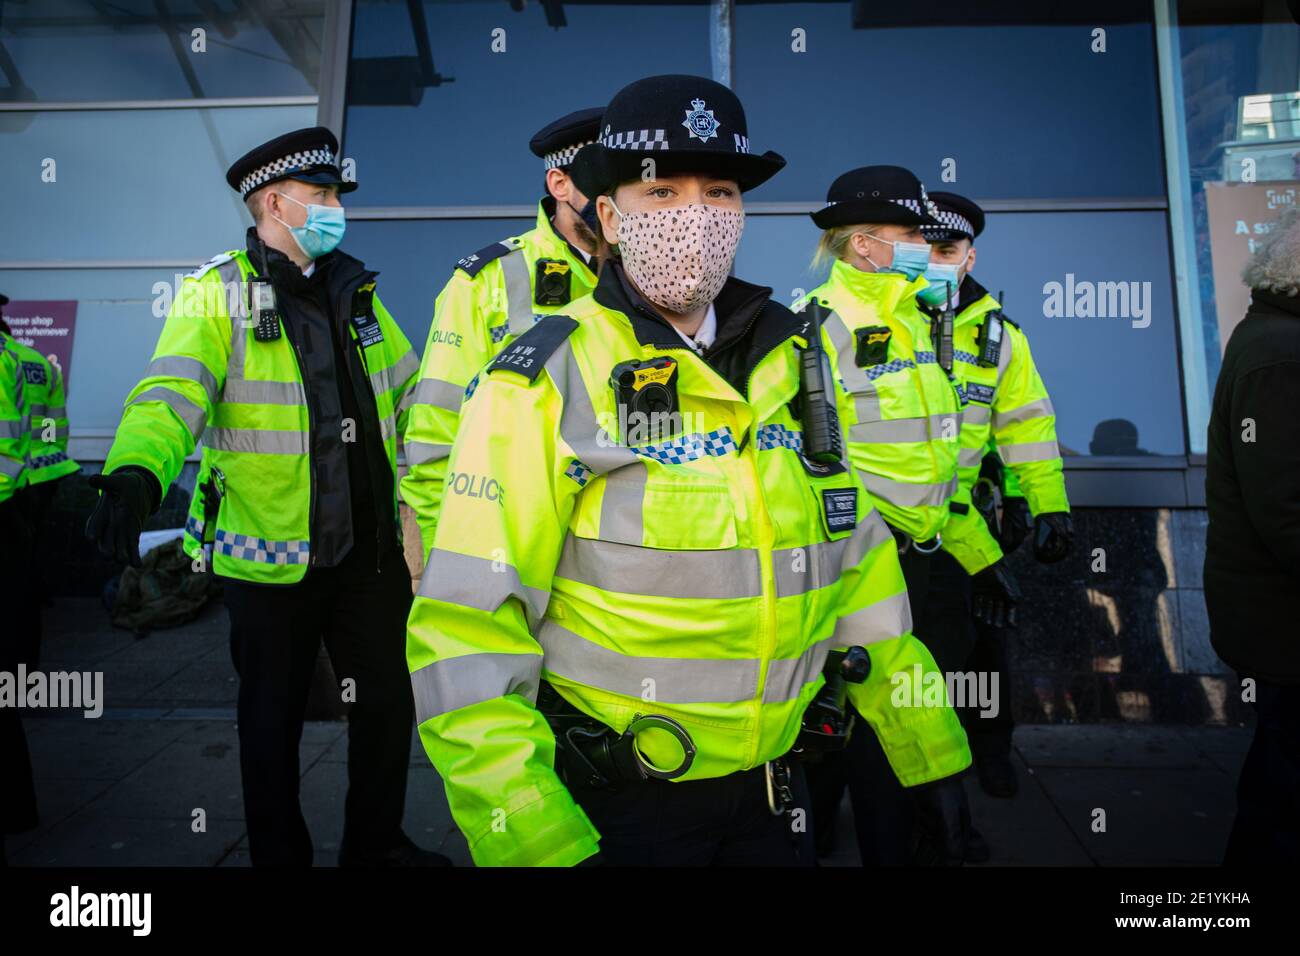 Police maintain a presence at Clapham High Street during the anti-lockdown demonstration on January 9, 2021 in London, England. Stock Photo